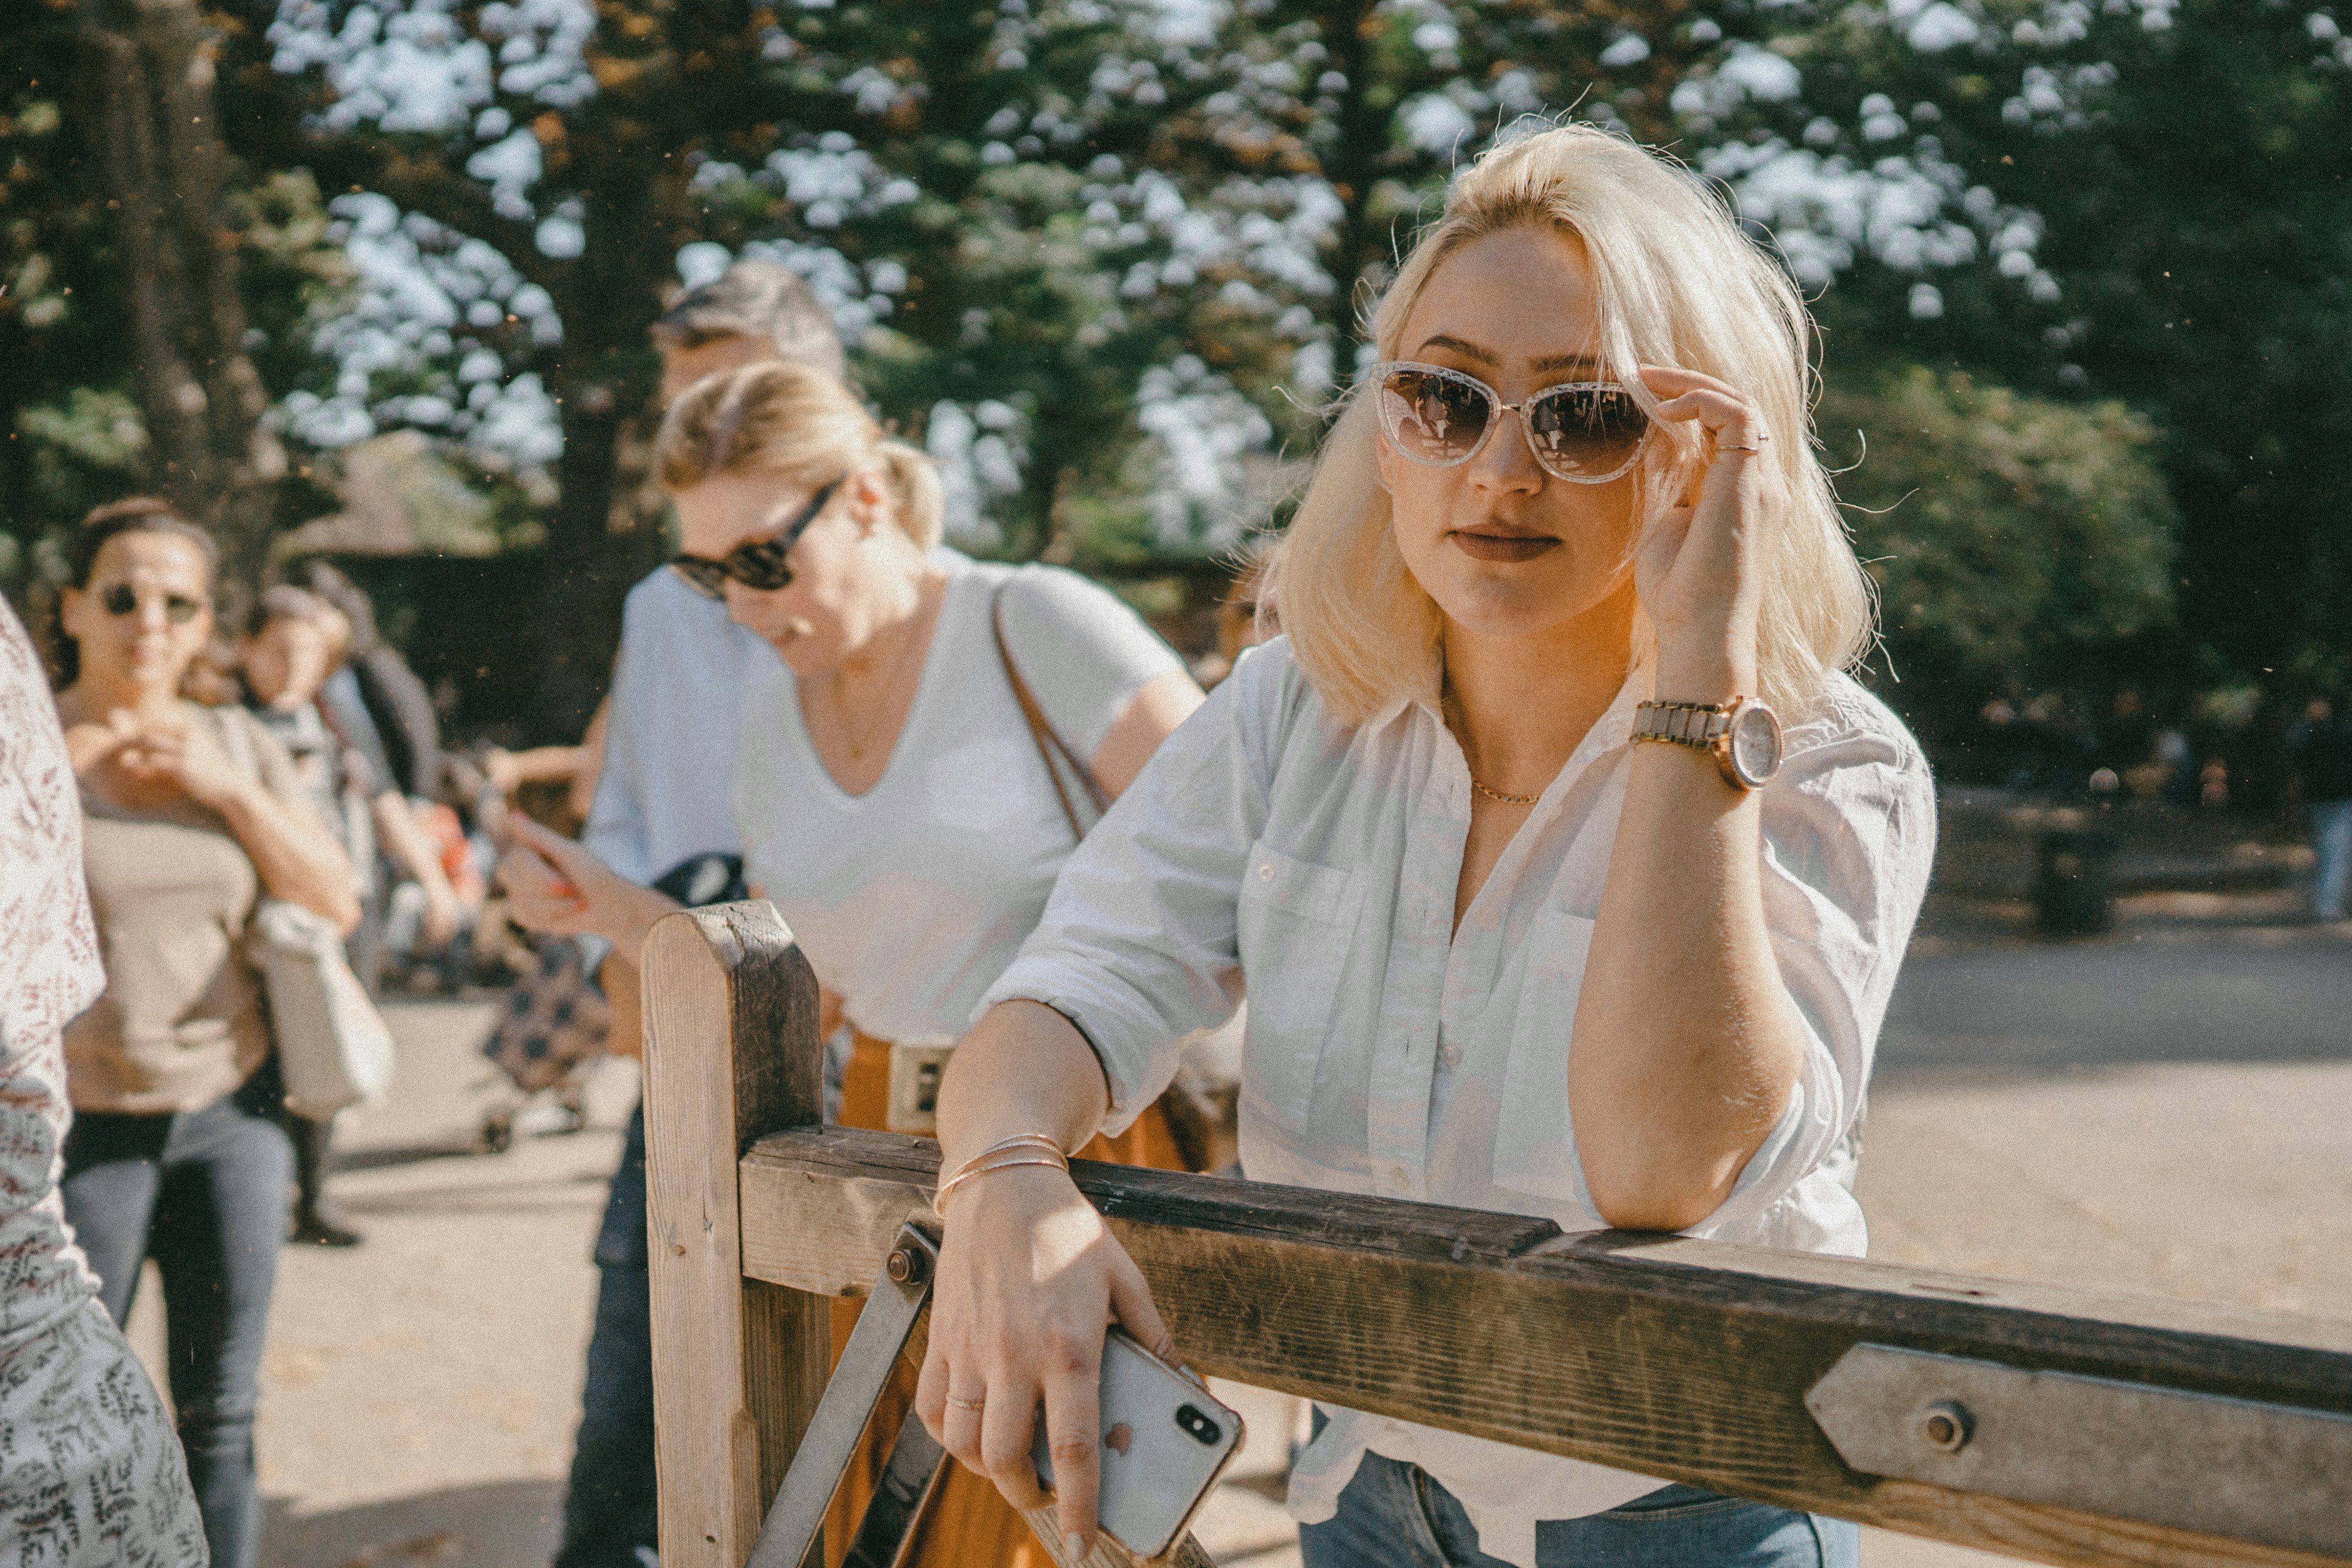 woman in white long sleeve shirt wearing sunglasses sitting on bench